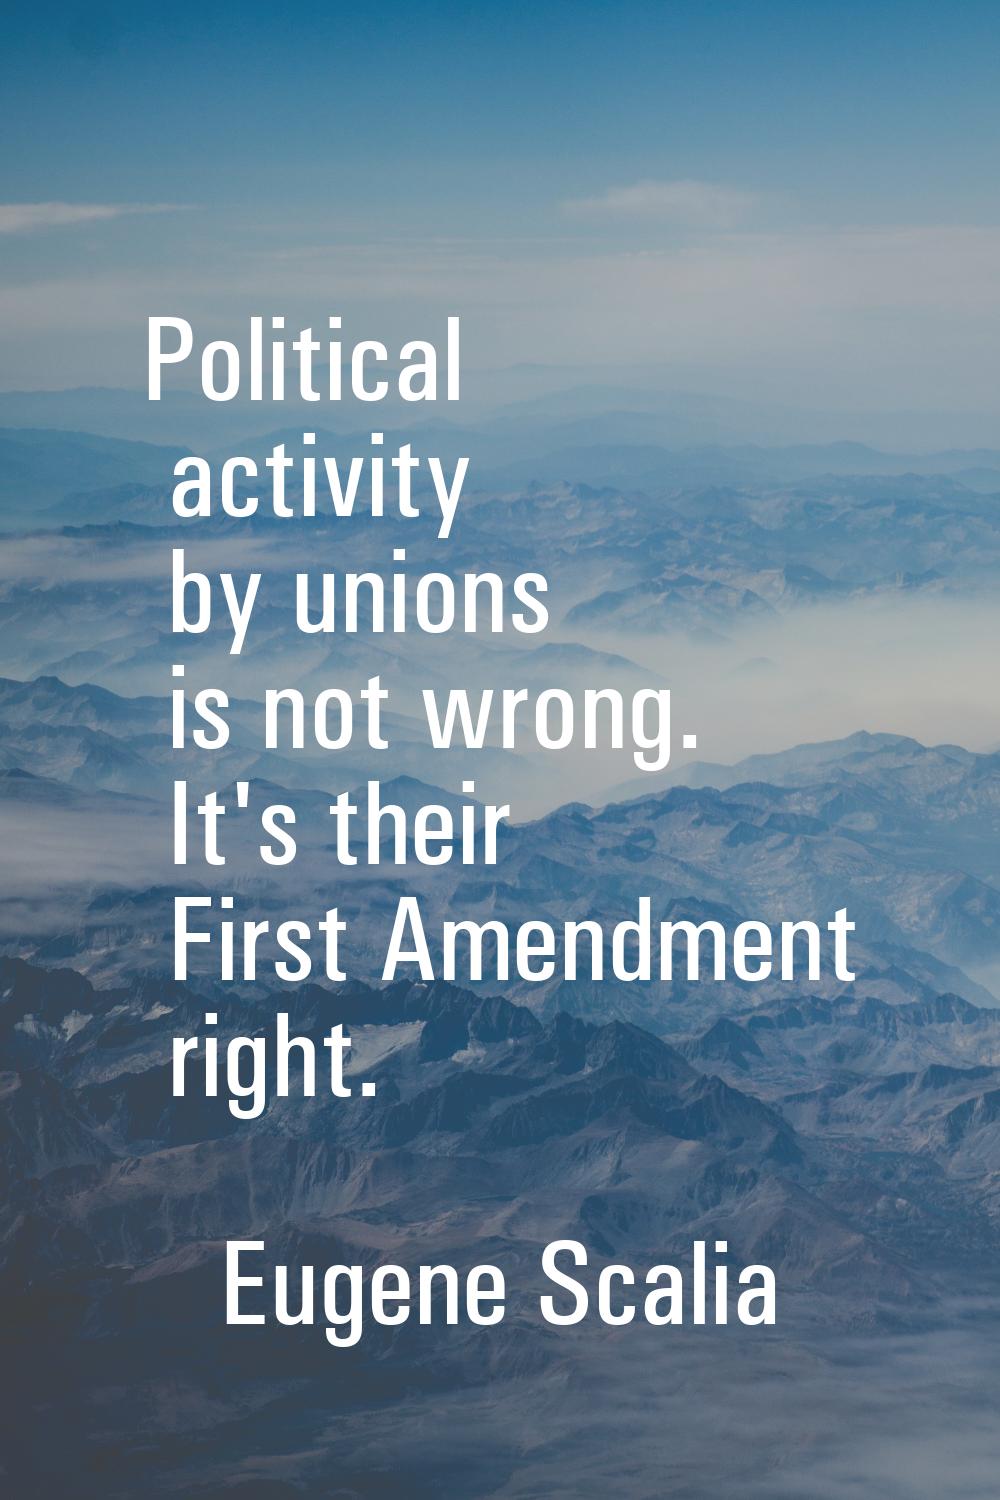 Political activity by unions is not wrong. It's their First Amendment right.